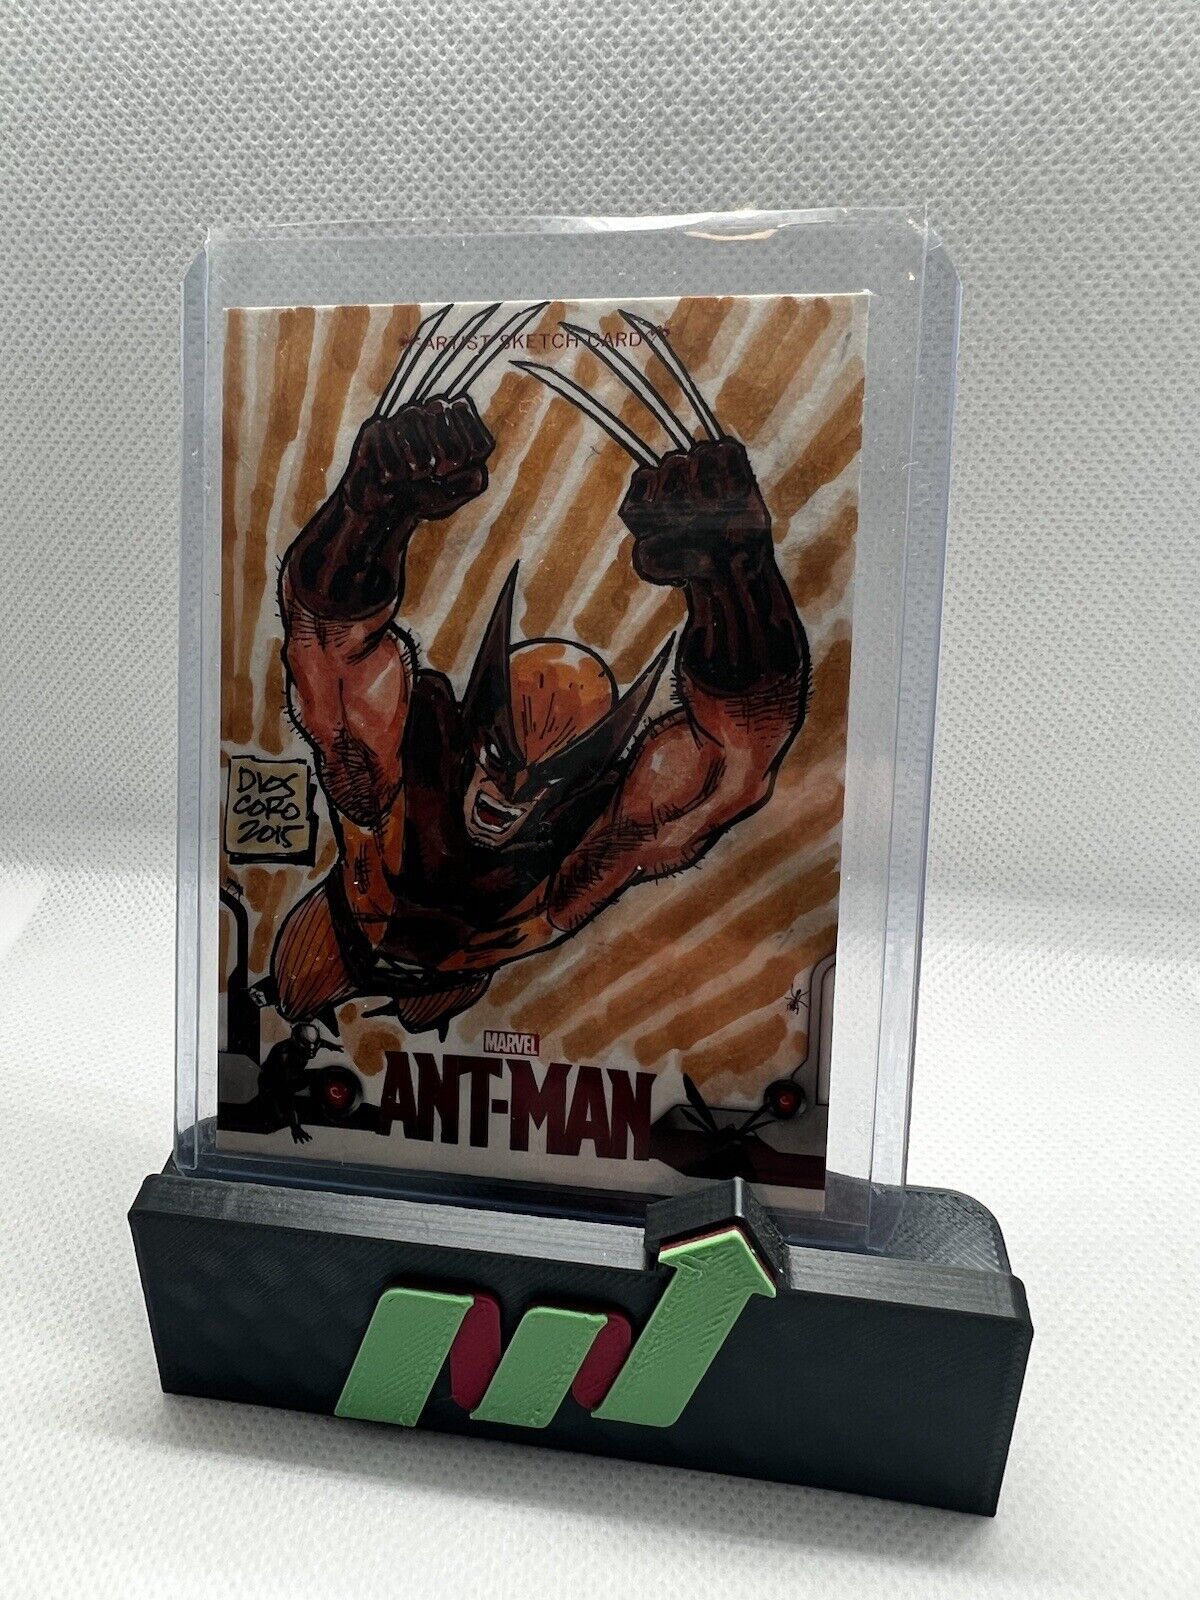 2015 UPPER DECK ANT-MAN SKETCH CARD - WOLVERINE by DIOS CORO 1/1